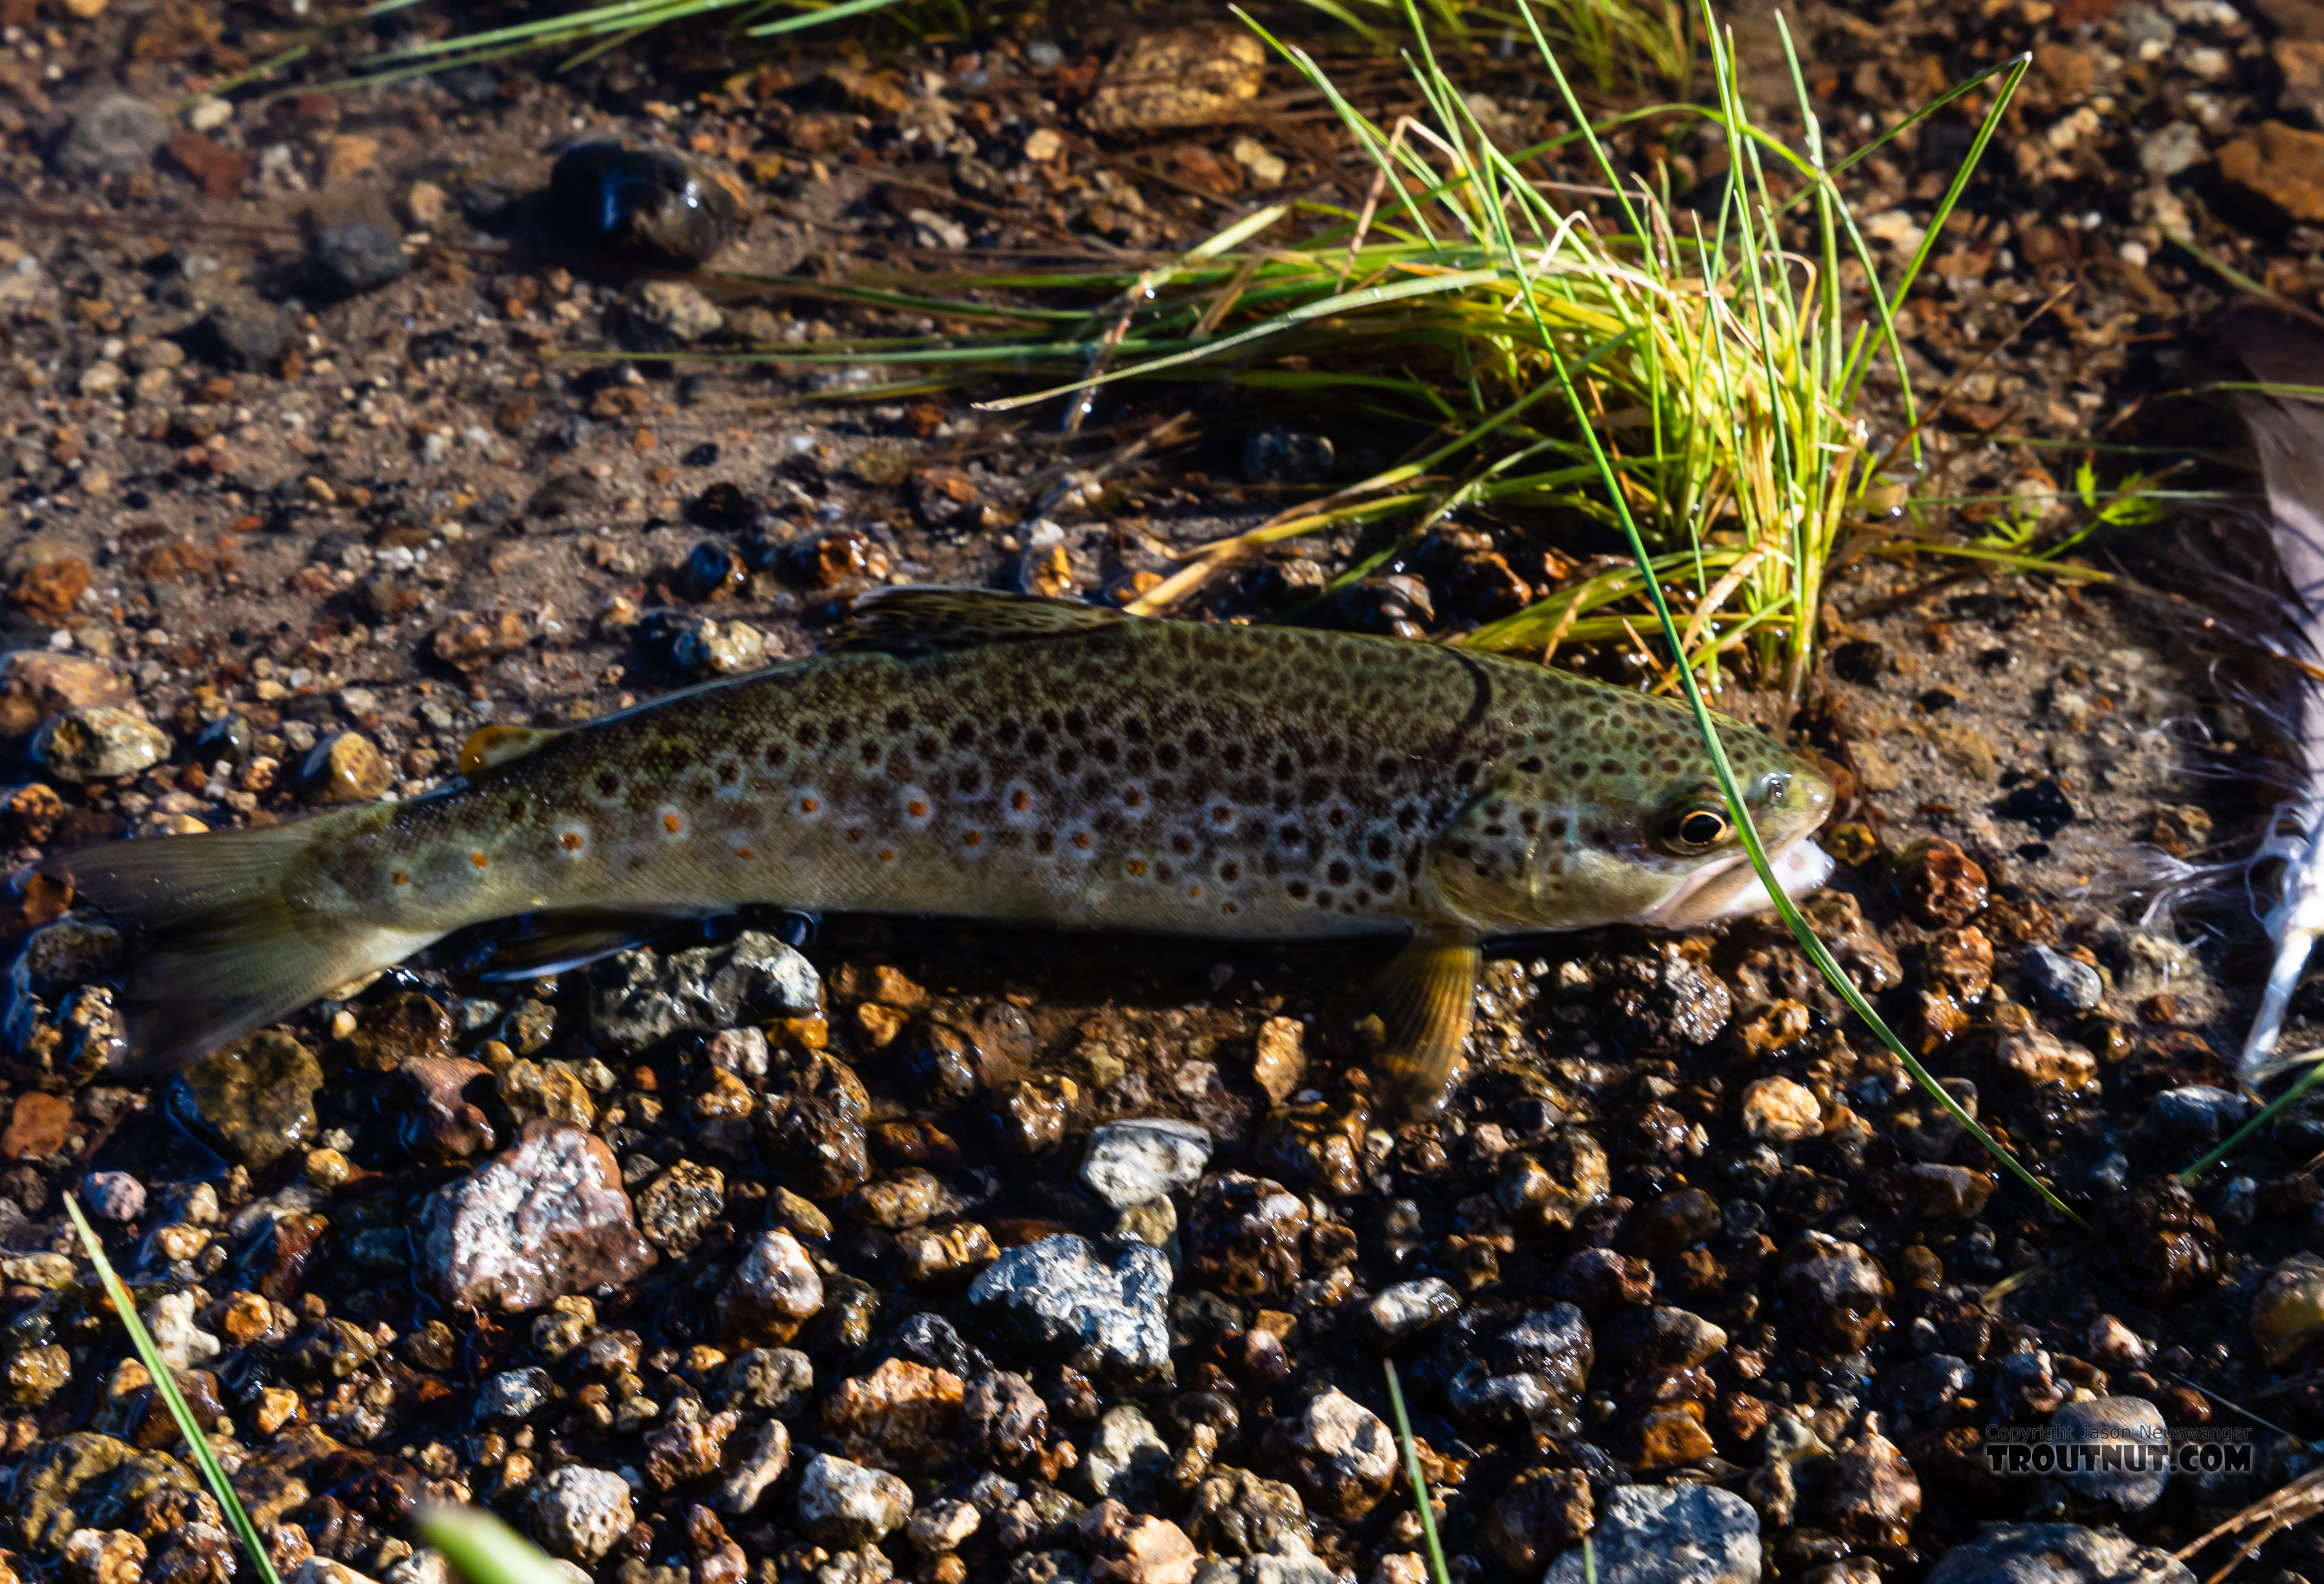 This little brown trout was released in the shallows but really wanted a picture so it jumped back onto dry land and posed like this. Then I insisted it go back in the water. From the Gibbon River in Wyoming.